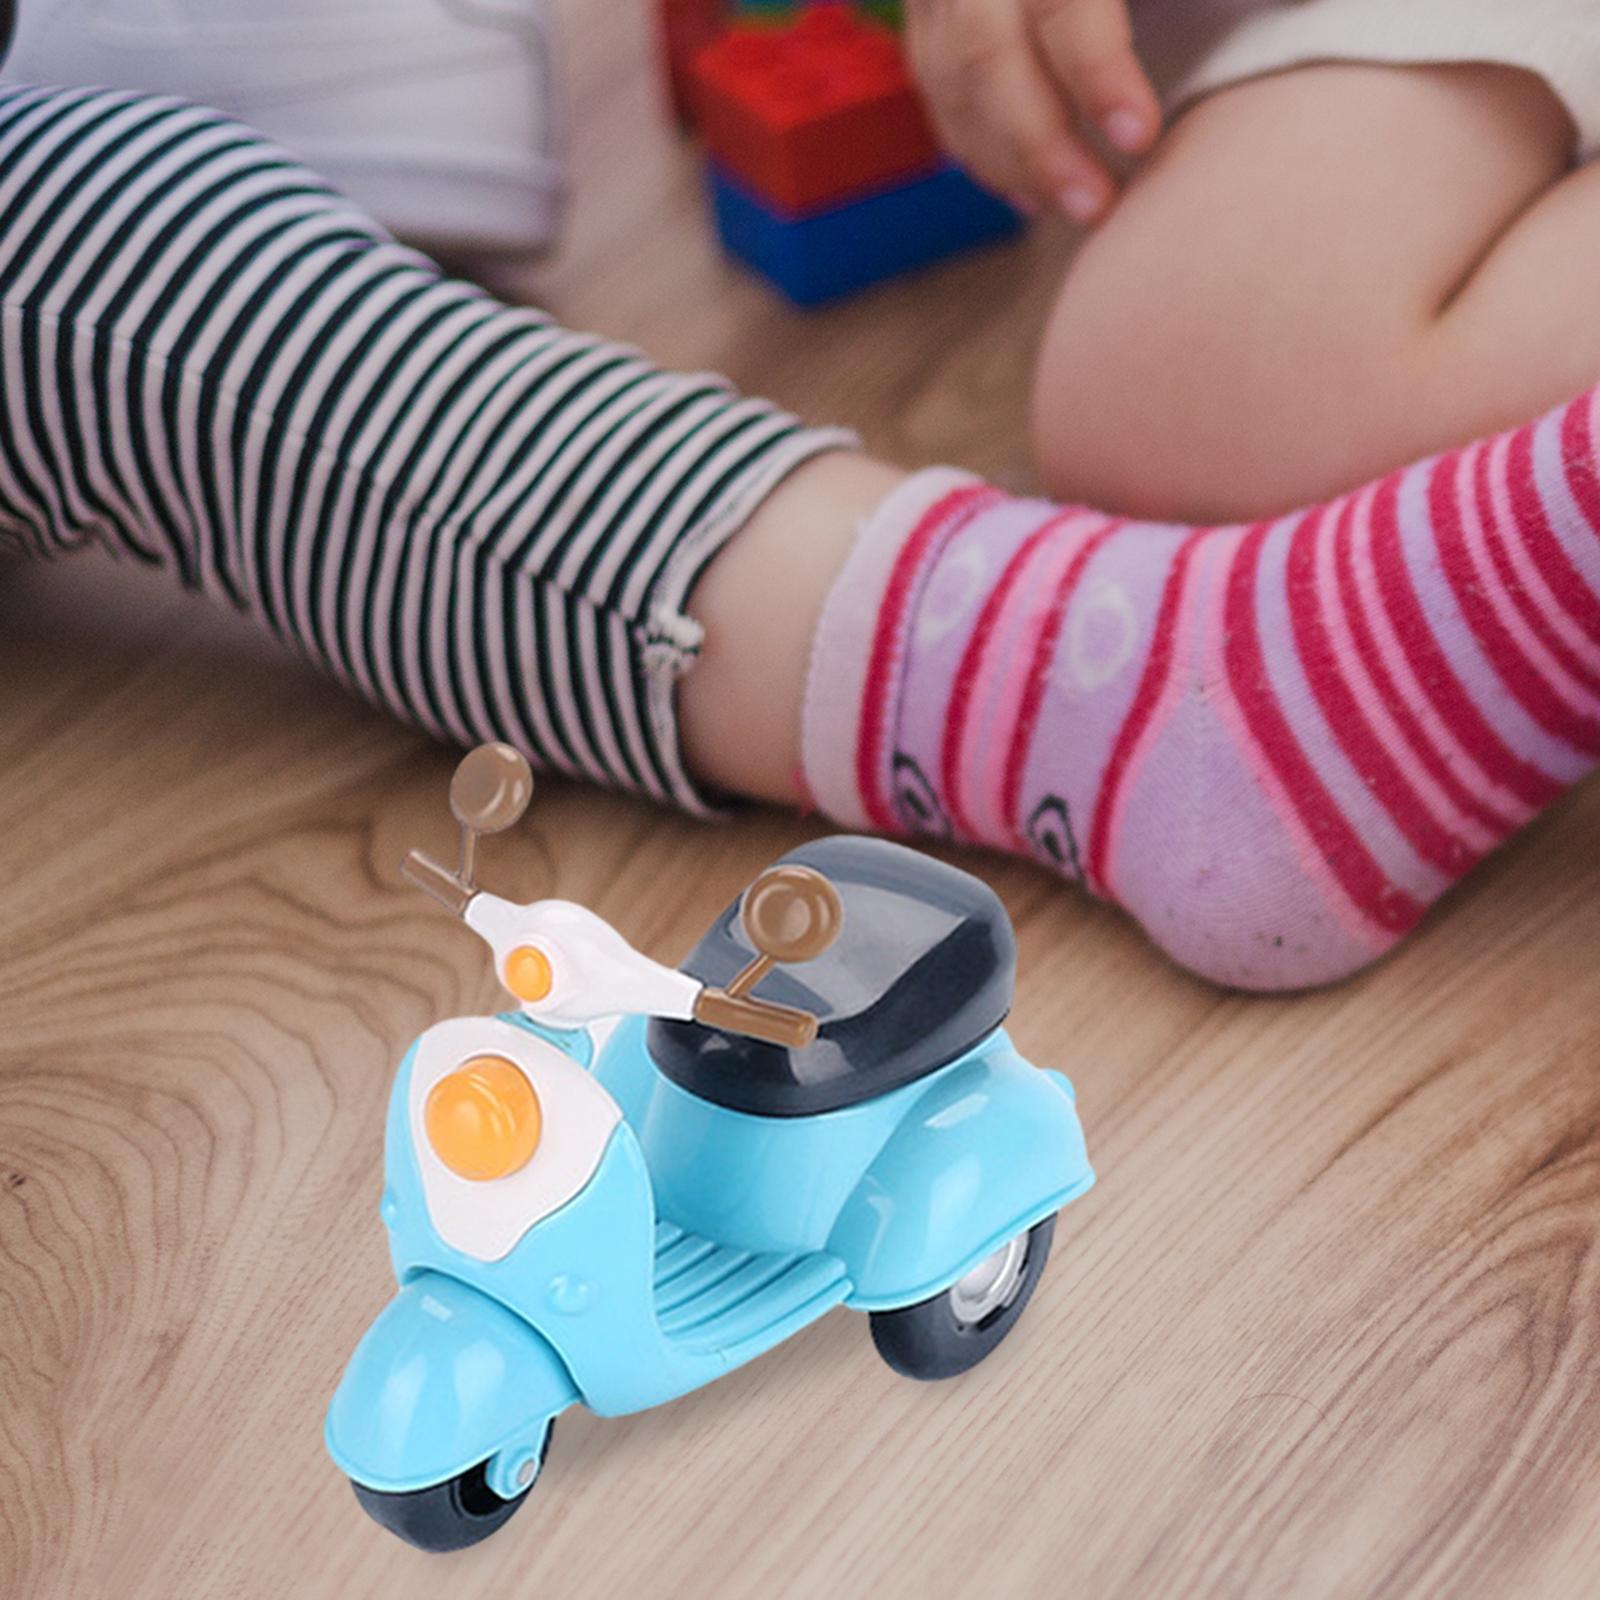 1/12 Dollhouse Tricycle Dollhouse Furniture Toy Accessories Decor Ornament High Simulation Kids Trike Children Play Doll Toy